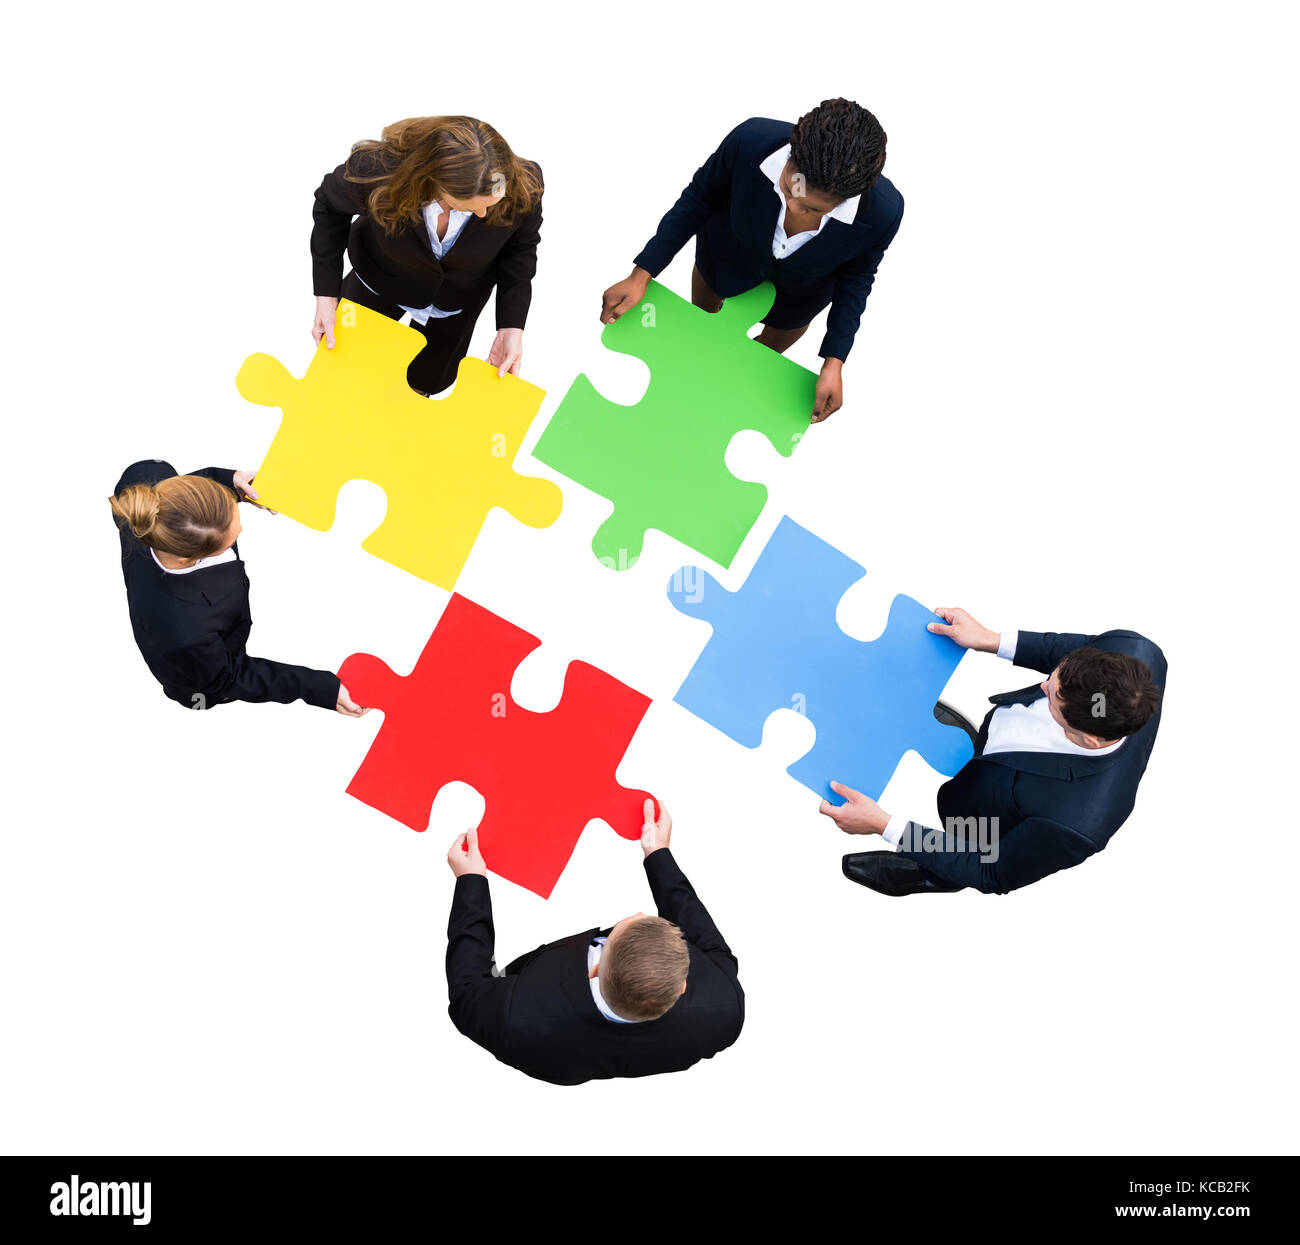 High Angle View Of A Businesspeople Solving Jigsaw Puzzle On White Background Stock Photo